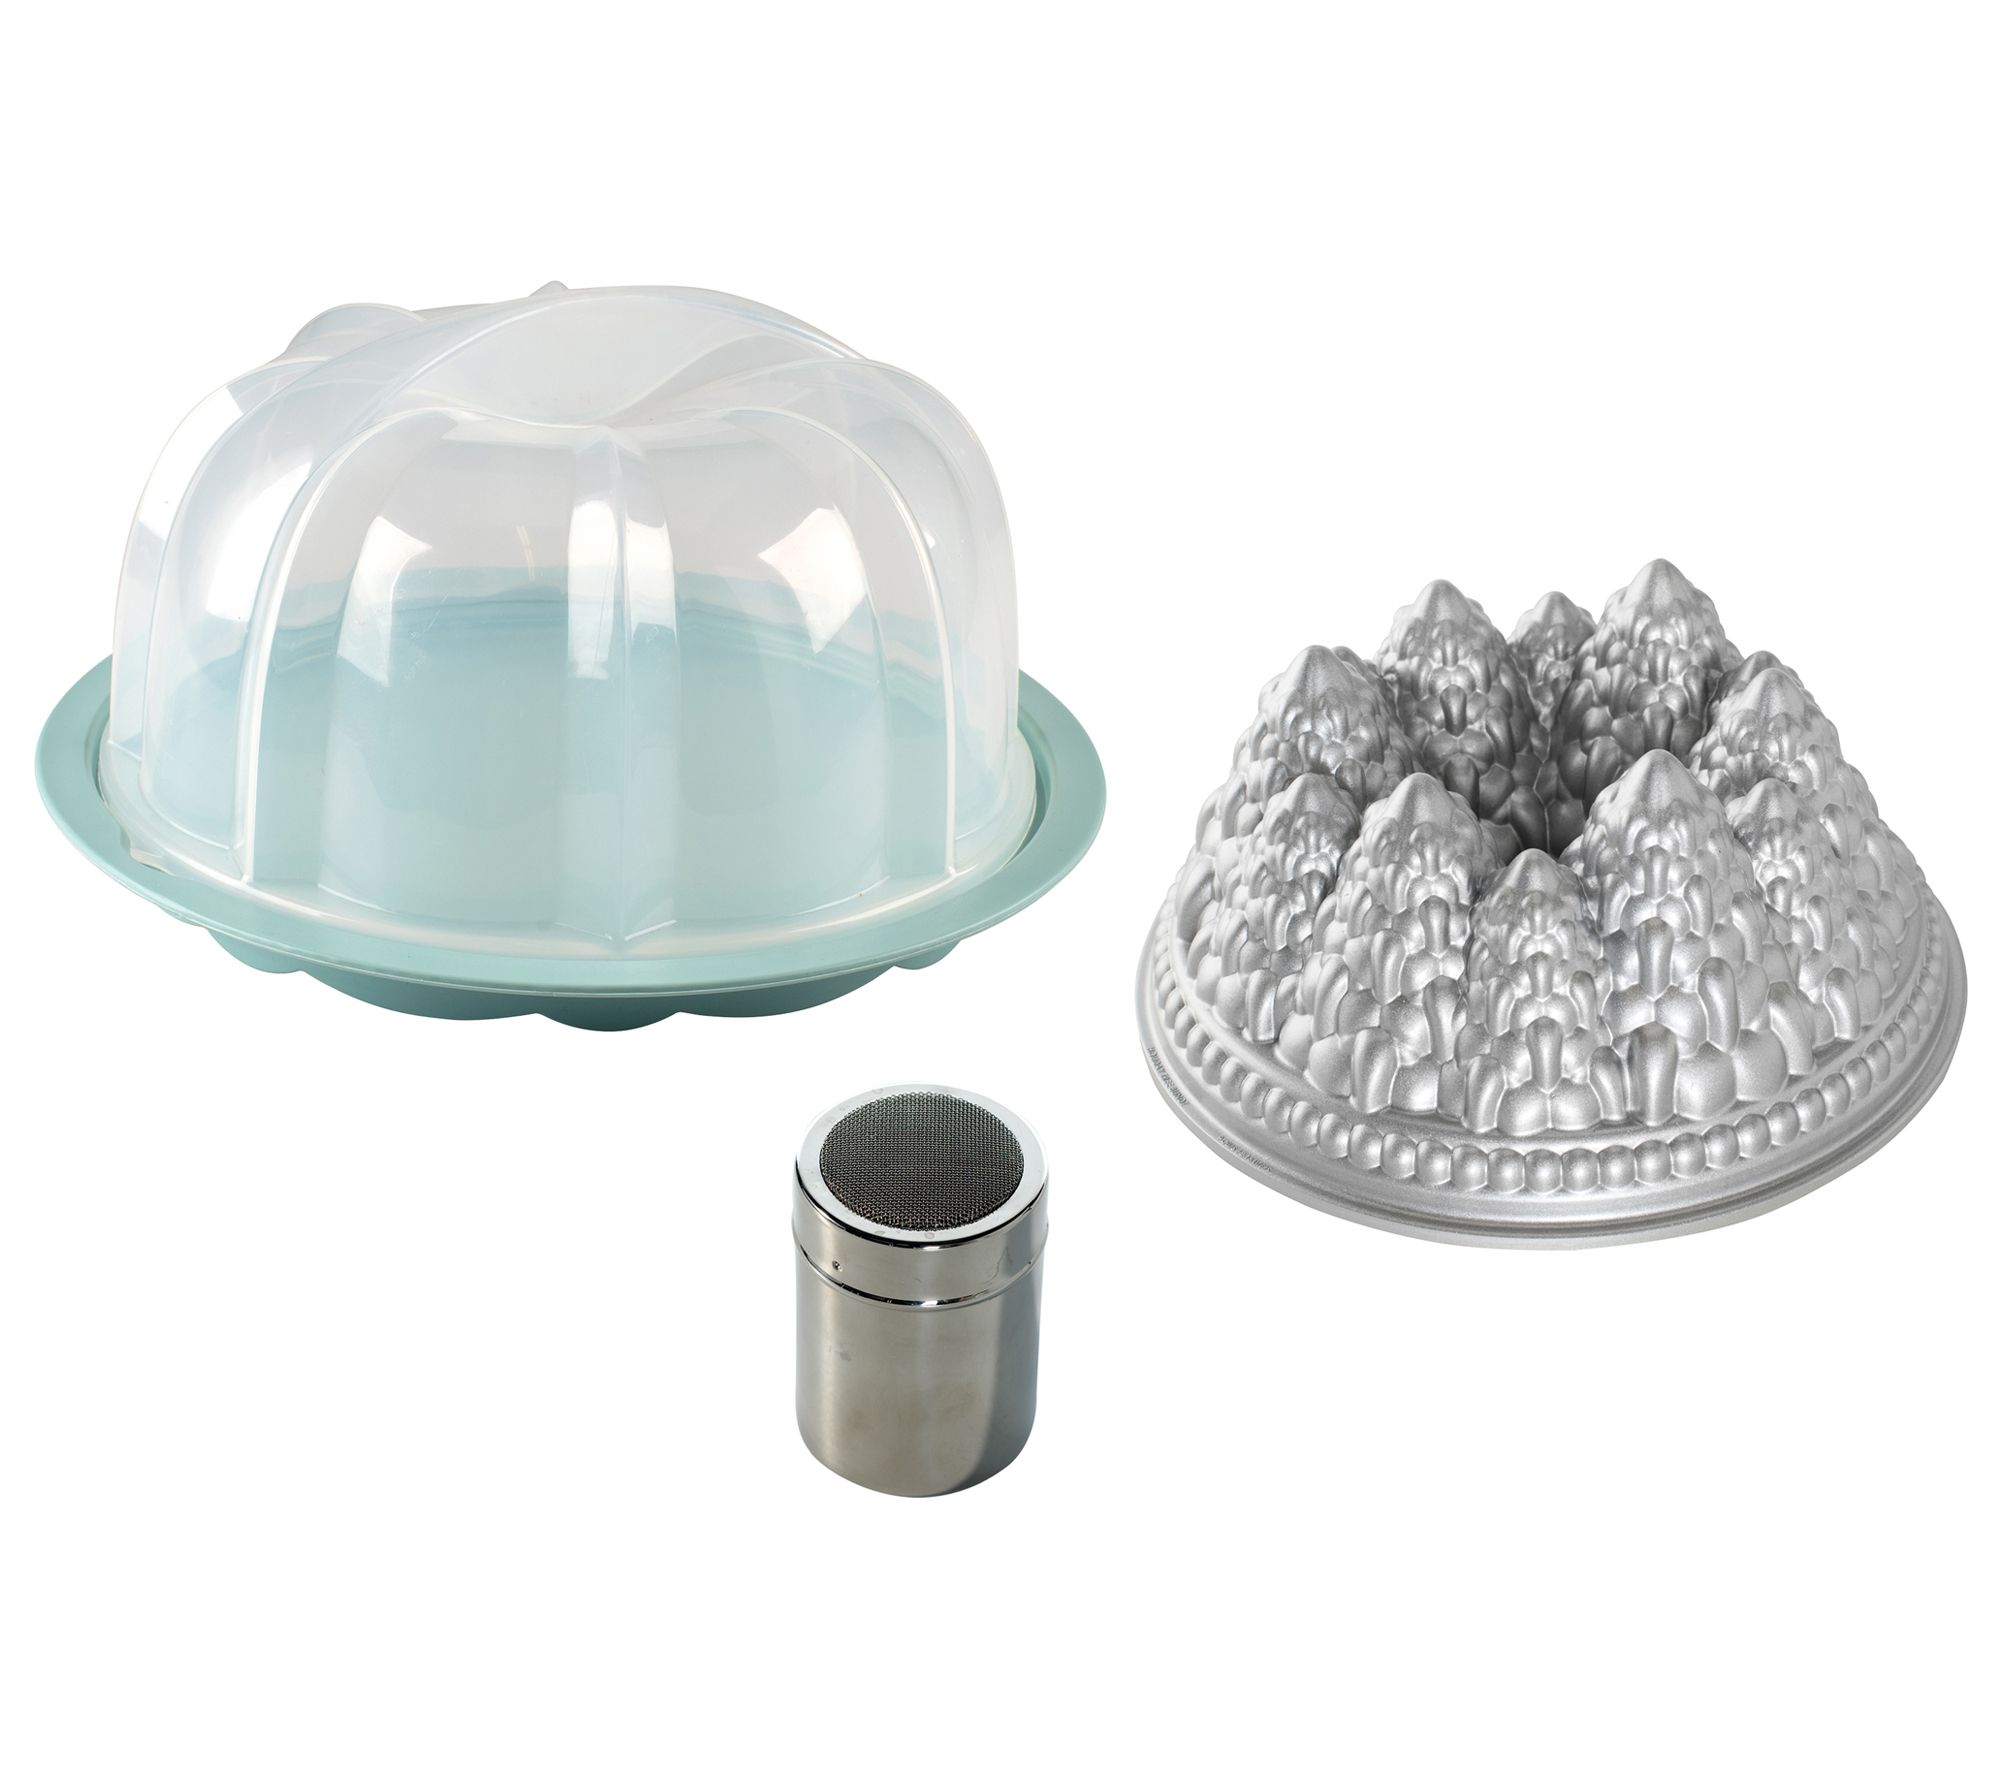 Nordic Ware 3pc Bundt Pan with Translucent Cake Keeper 3 ct